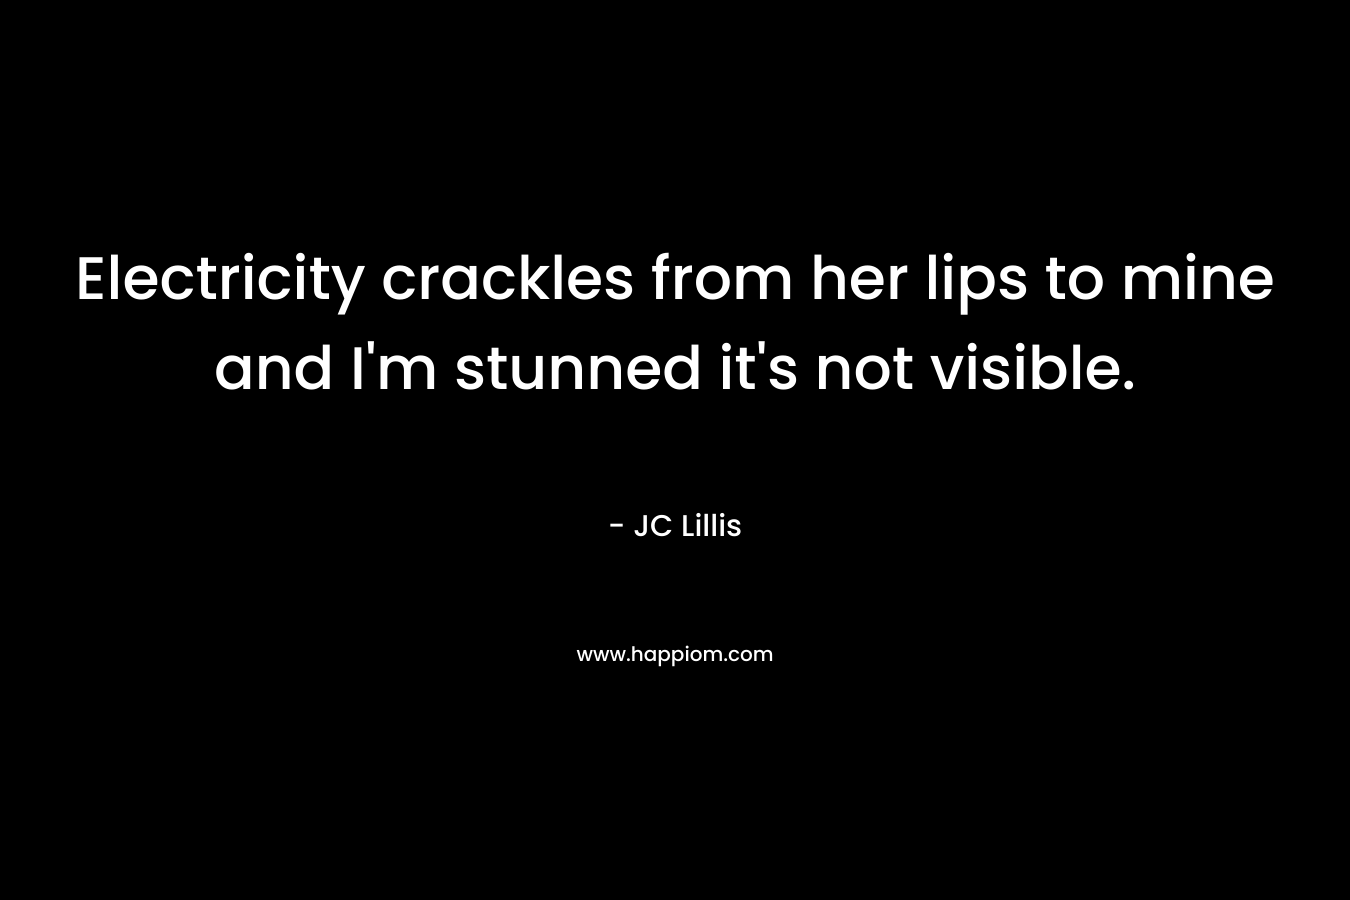 Electricity crackles from her lips to mine and I’m stunned it’s not visible. – JC Lillis